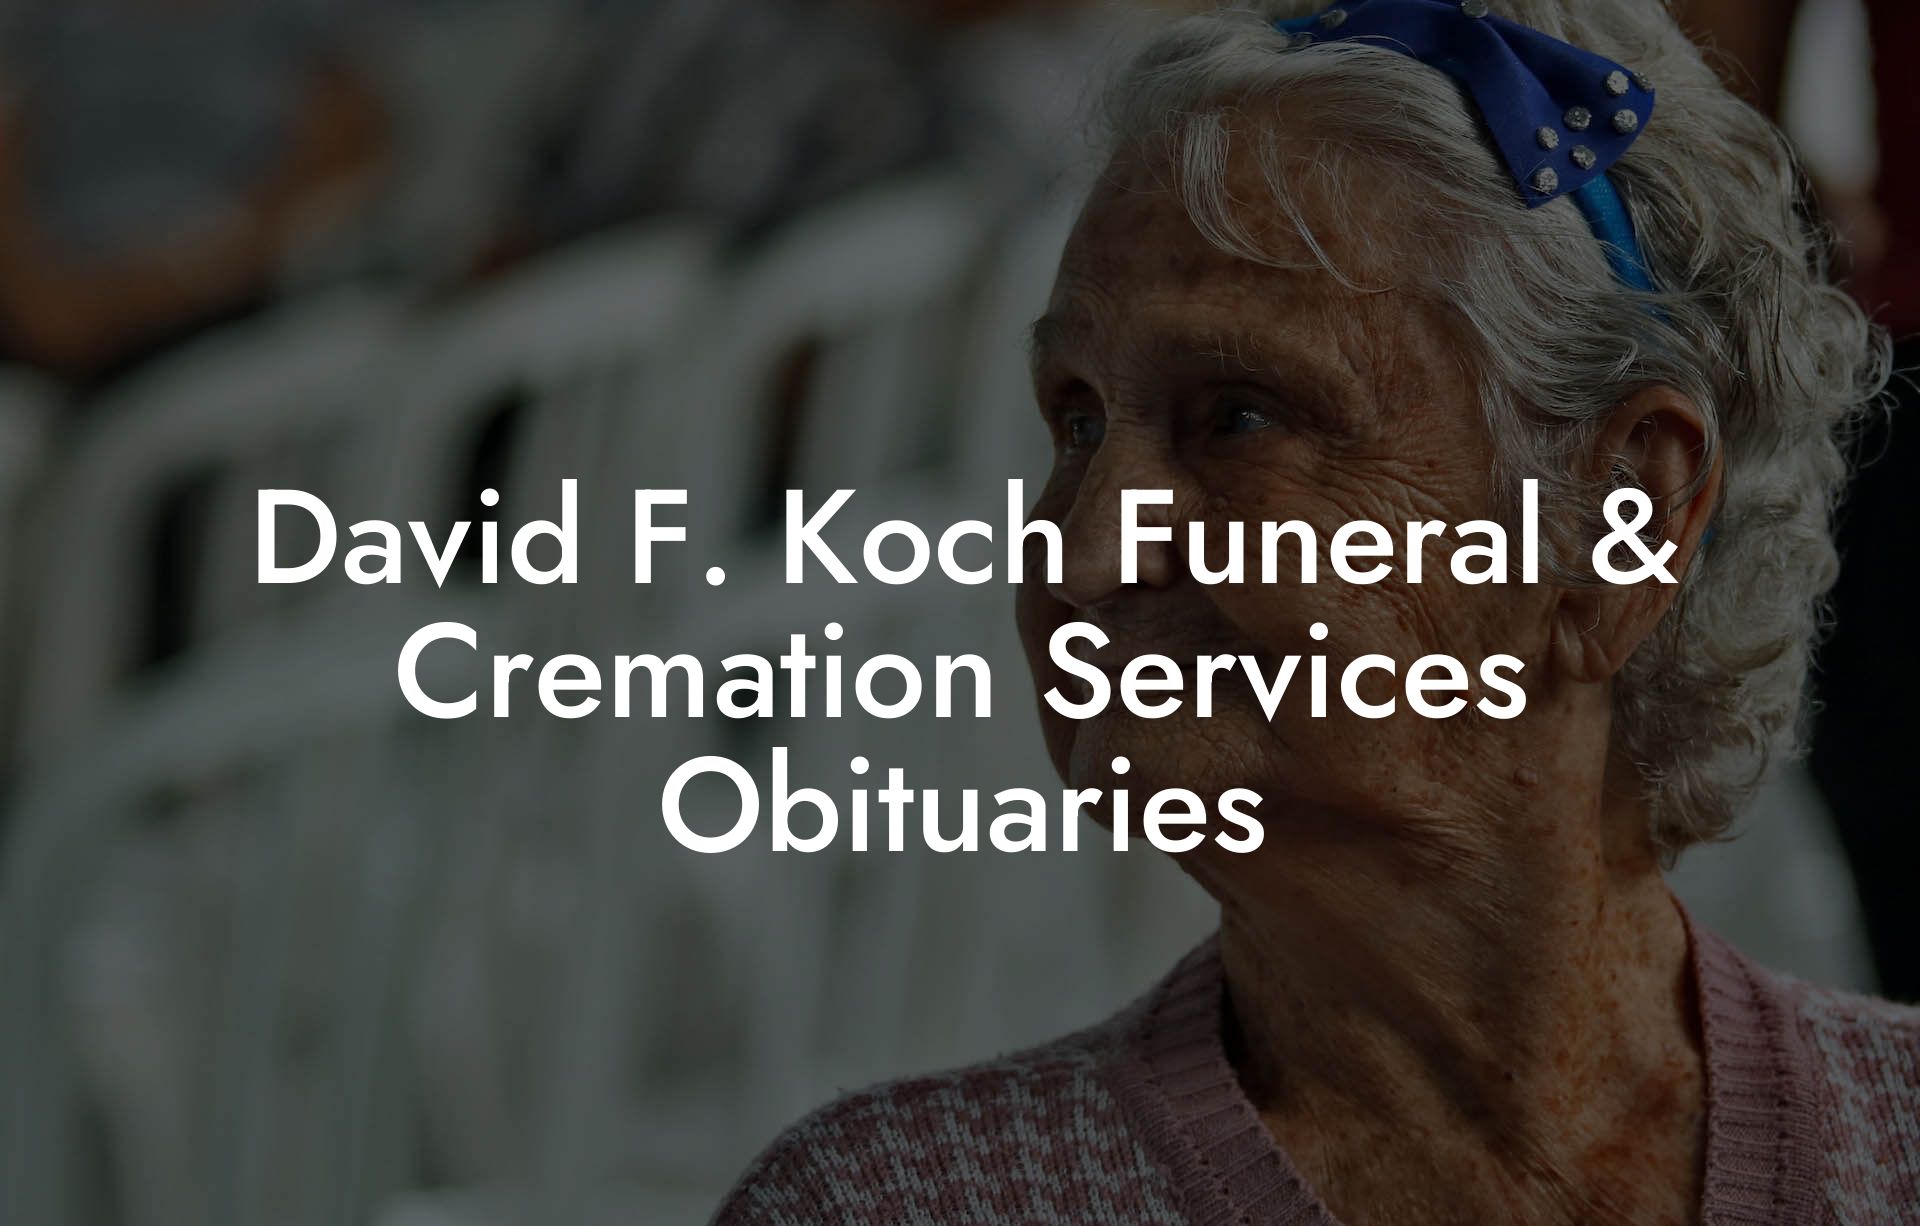 David F. Koch Funeral & Cremation Services Obituaries